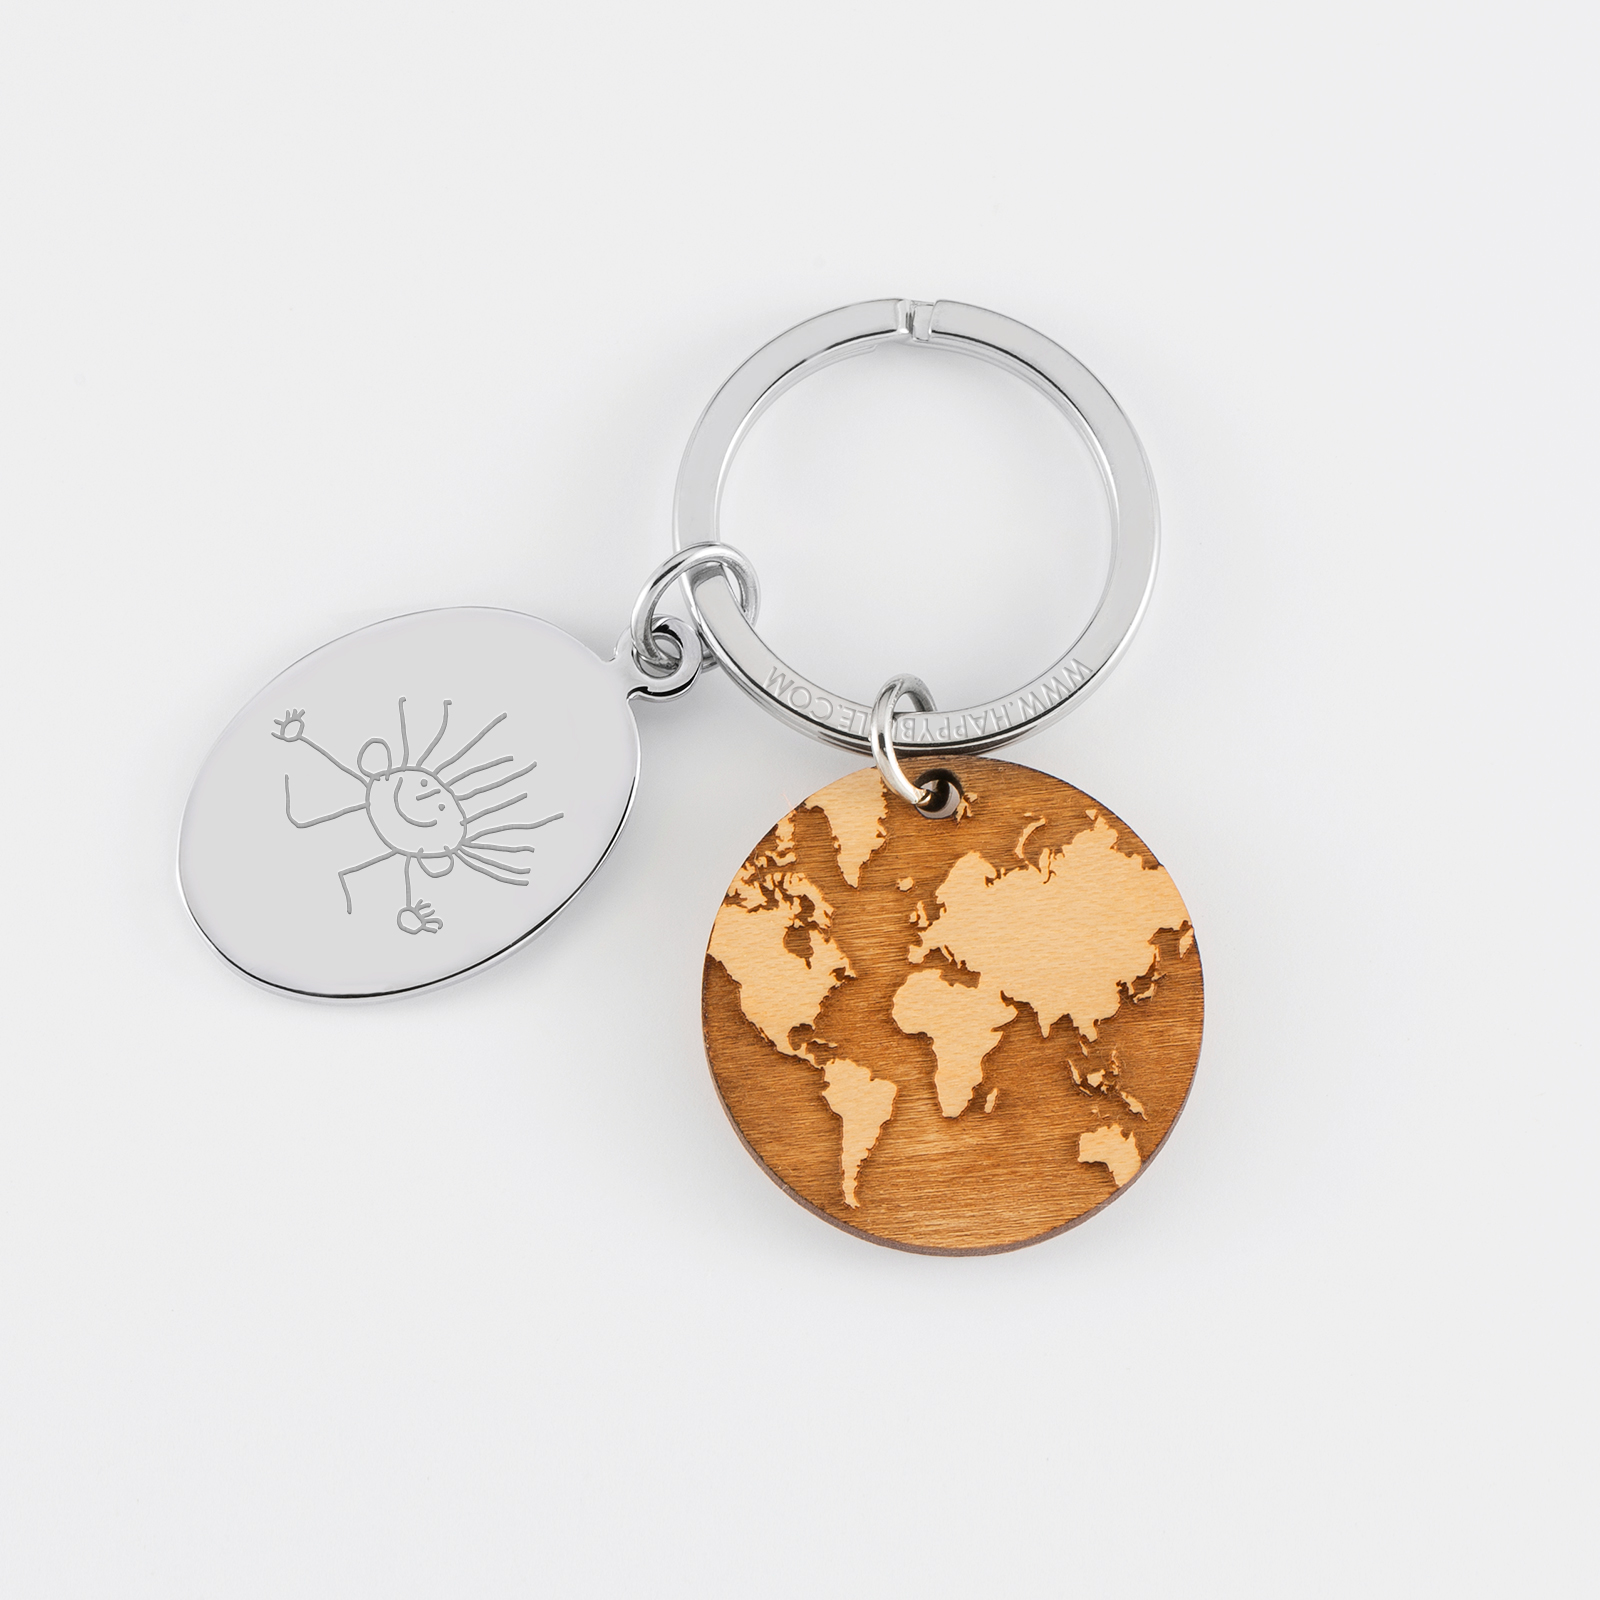 Personalised engraved oval steel medallion and wooden world charm keyring - sketch